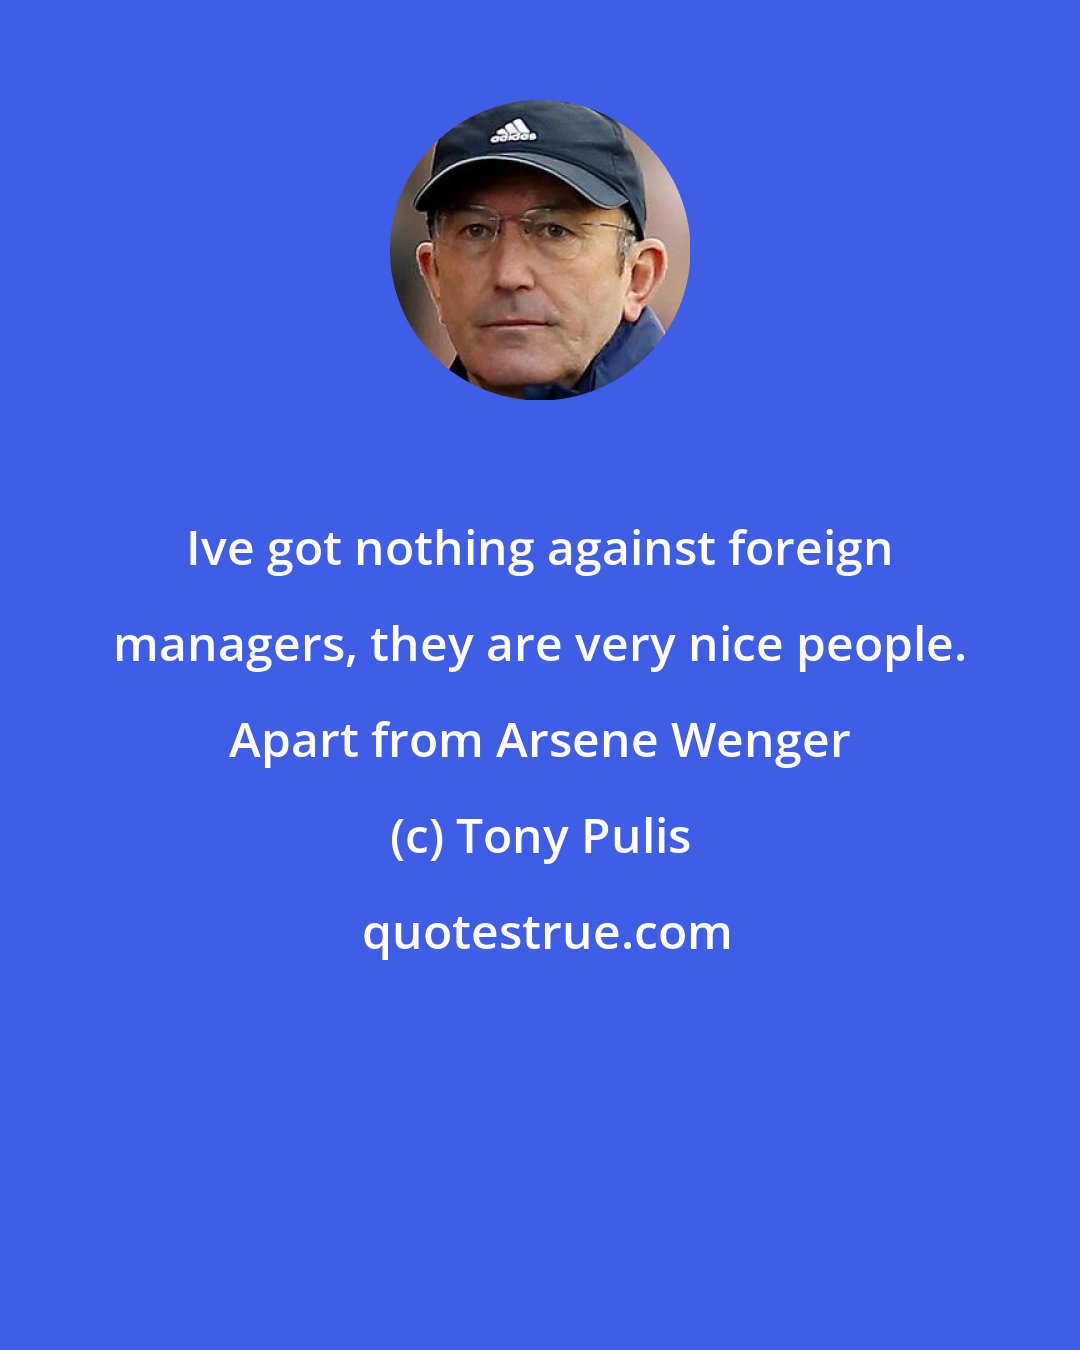 Tony Pulis: Ive got nothing against foreign managers, they are very nice people. Apart from Arsene Wenger